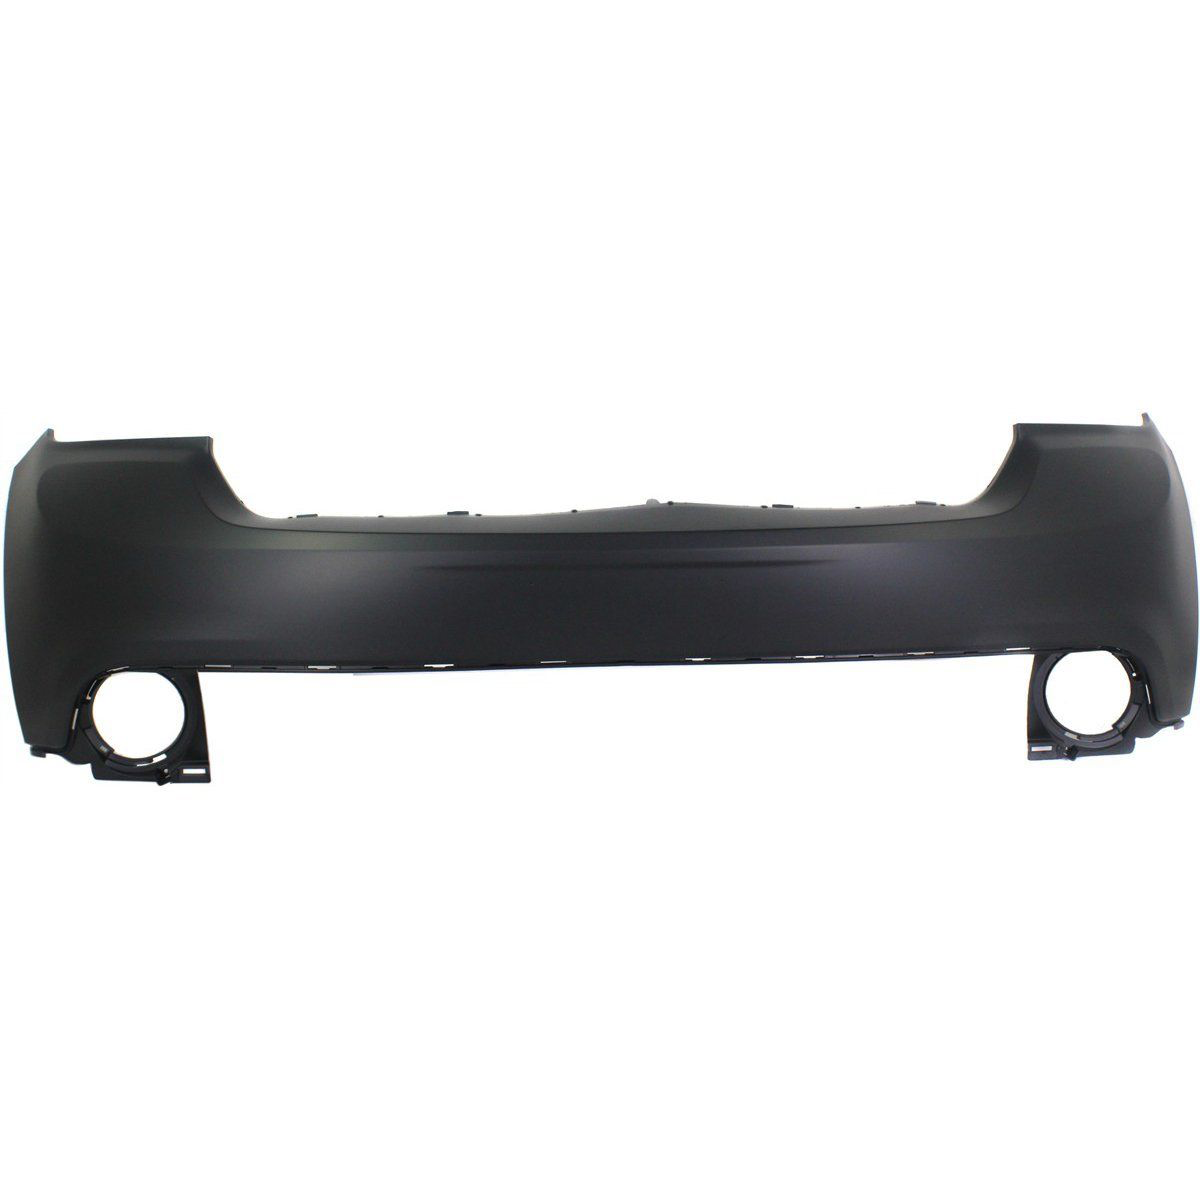 2011-2013 DODGE DURANGO Front Bumper Cover Upper Painted to Match